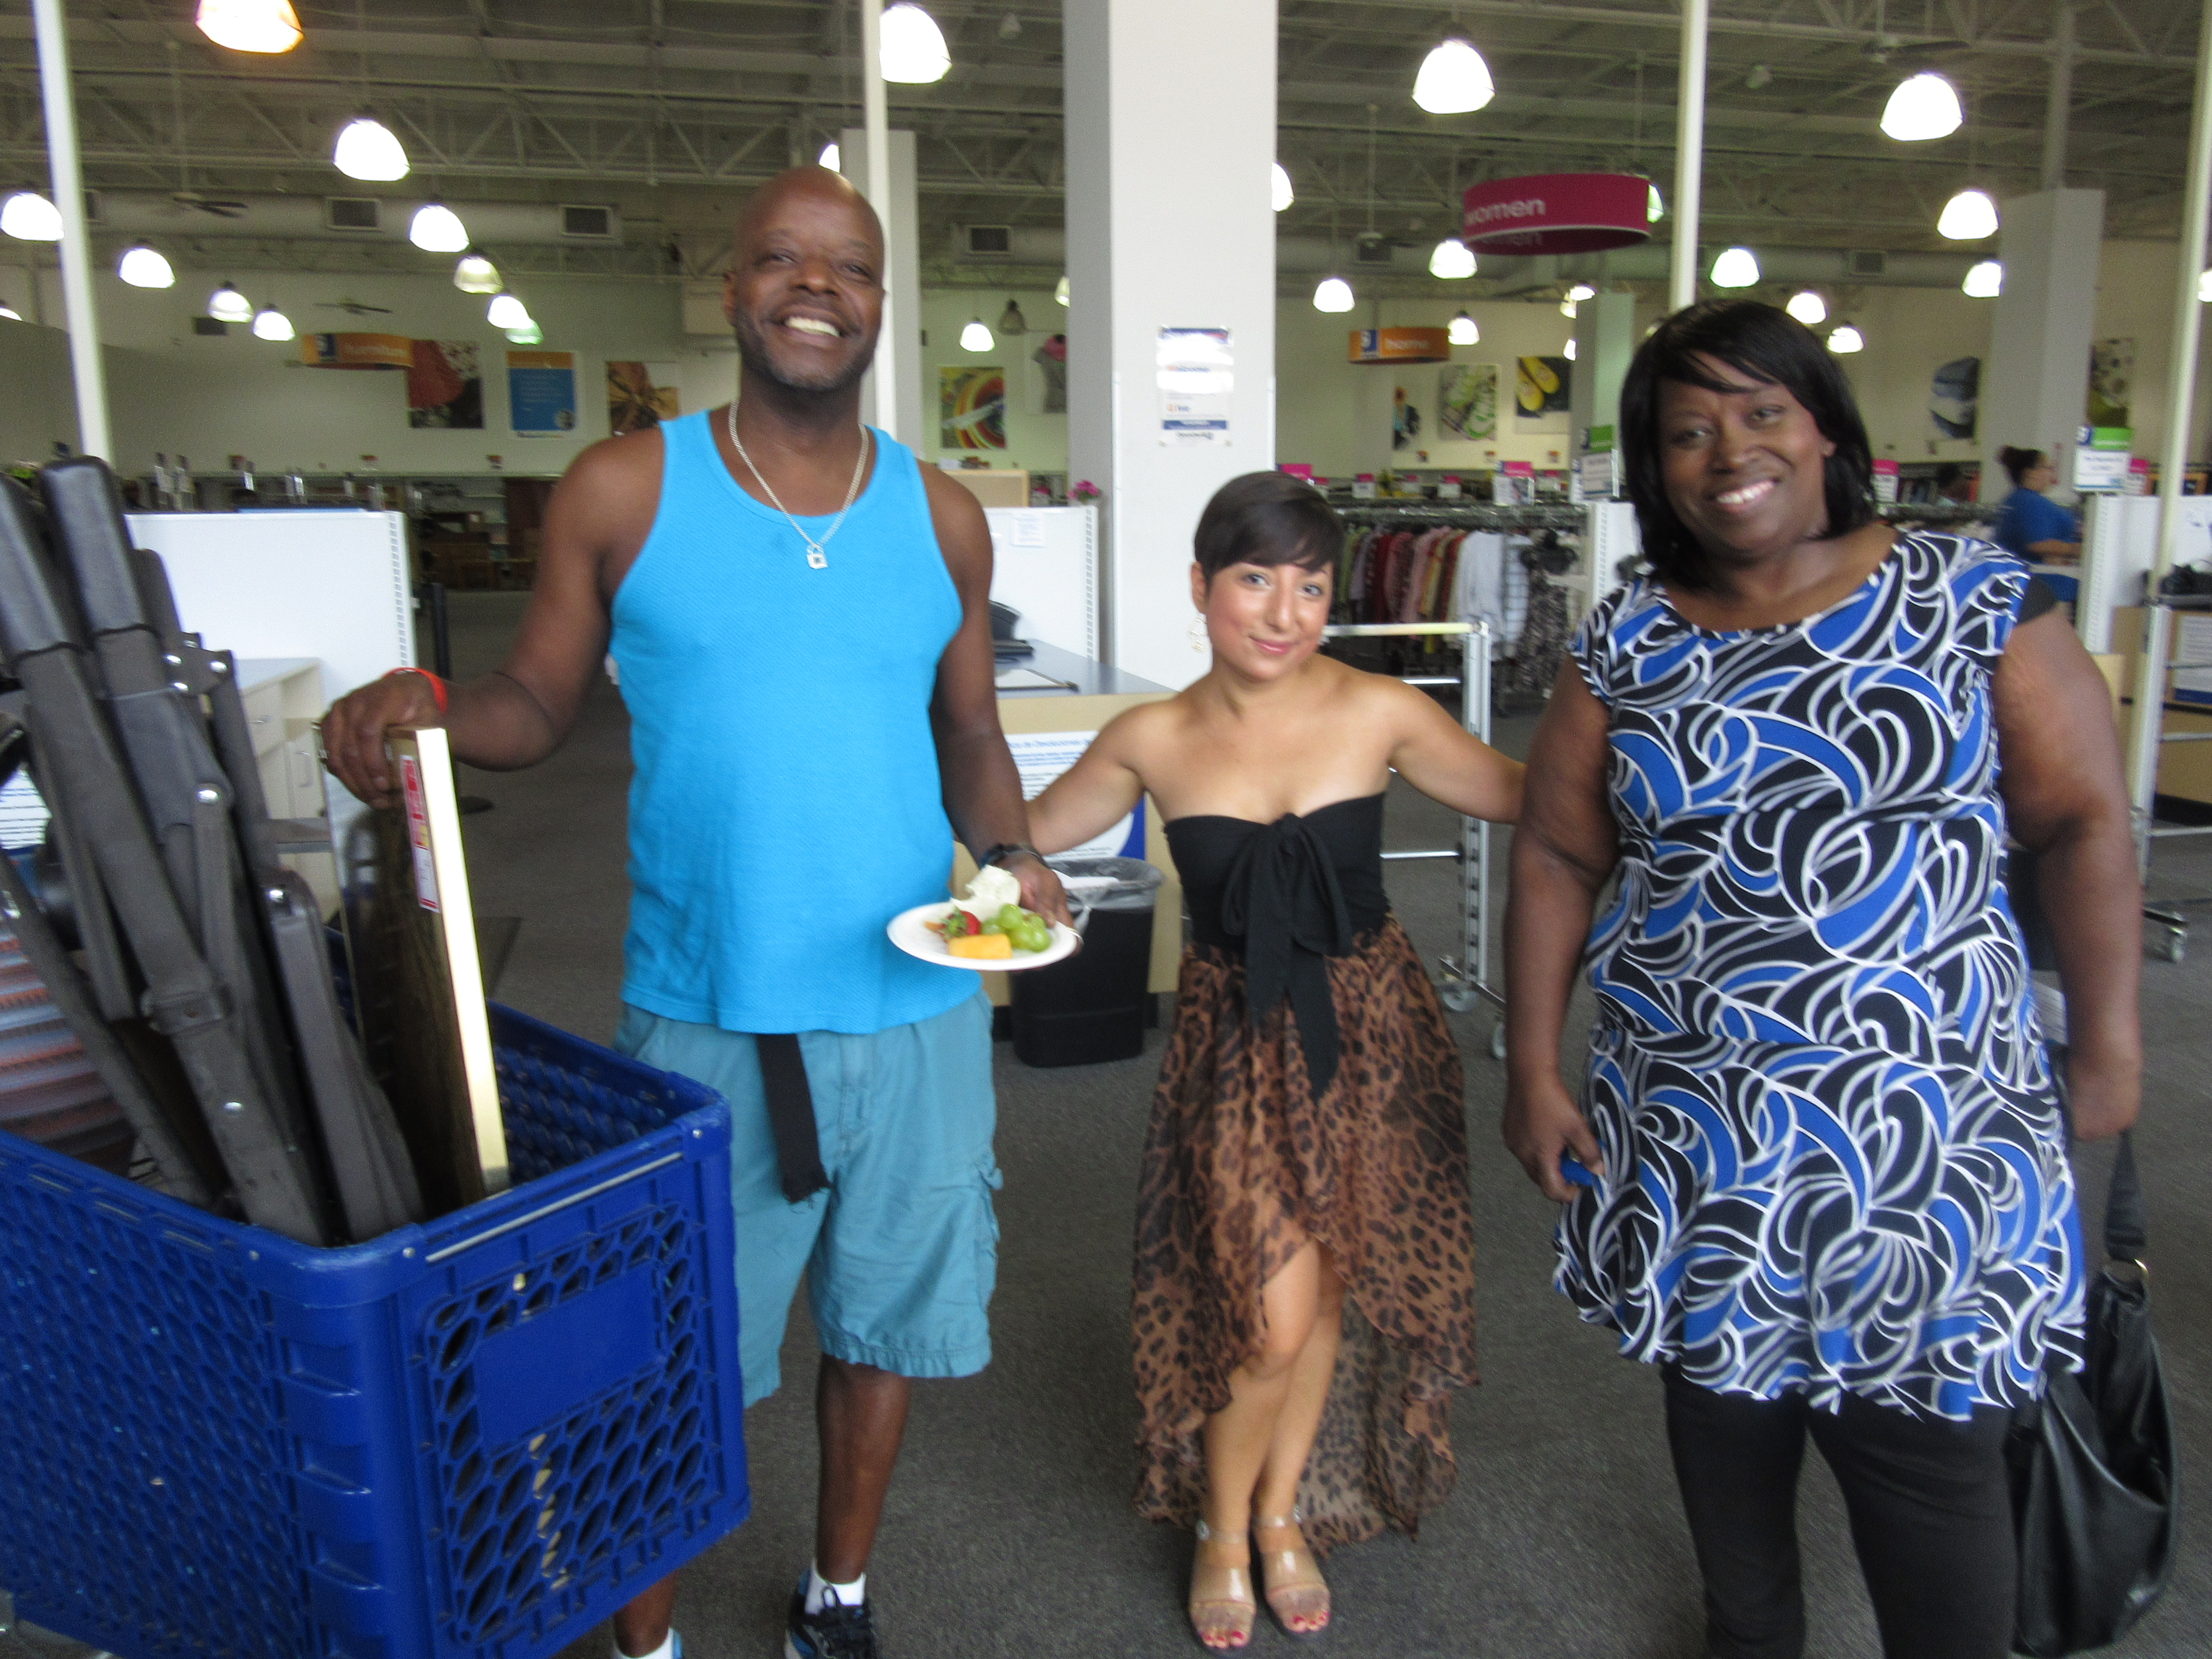 Carolyn poses for a photo with two meetup shoppers at the Bowie, MD Goodwill